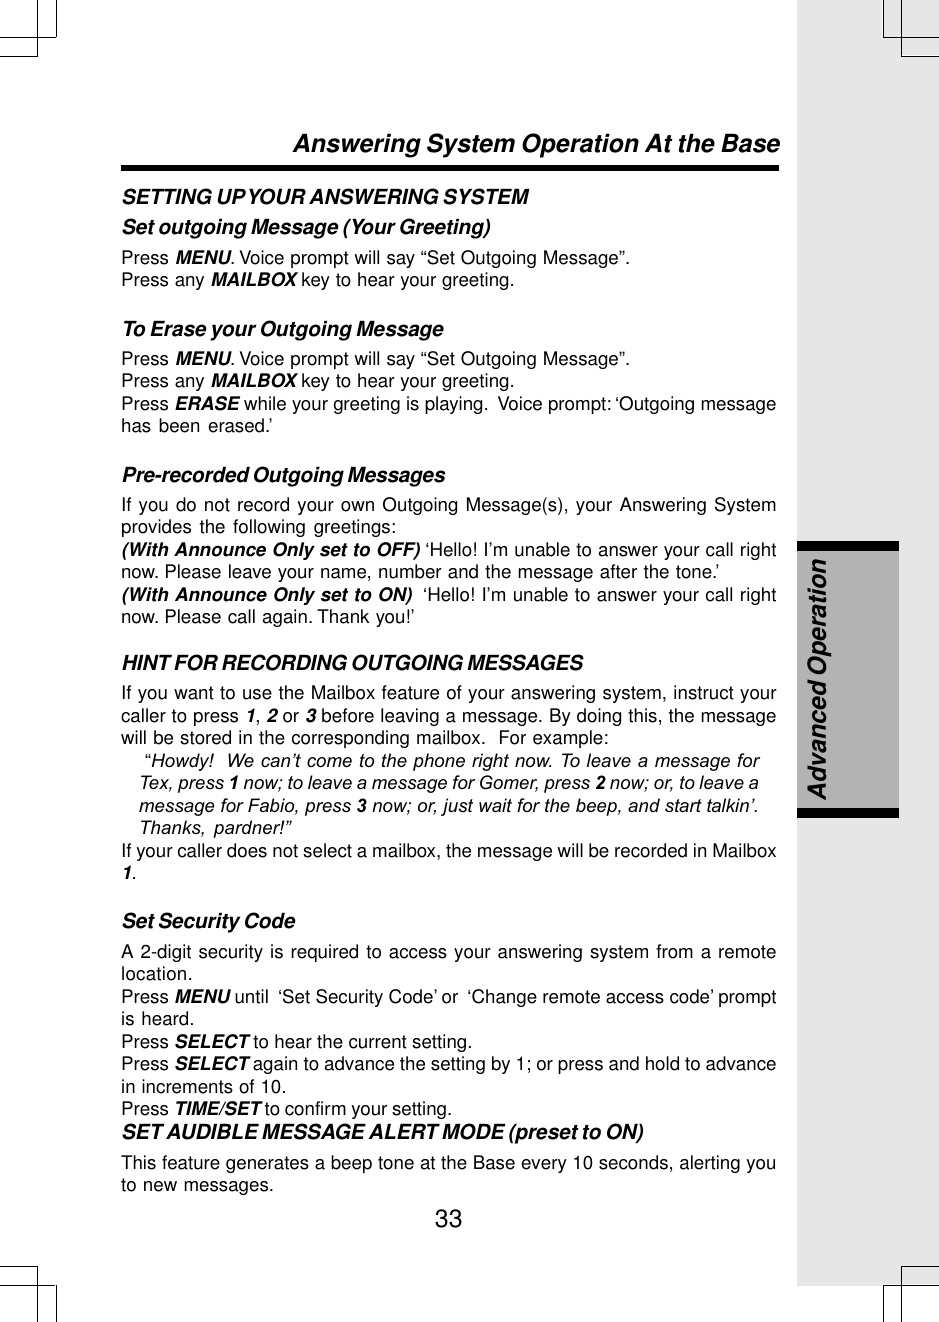 33SETTING UP YOUR ANSWERING SYSTEMSet outgoing Message (Your Greeting)Press MENU. Voice prompt will say “Set Outgoing Message”.Press any MAILBOX key to hear your greeting.To Erase your Outgoing MessagePress MENU. Voice prompt will say “Set Outgoing Message”.Press any MAILBOX key to hear your greeting.Press ERASE while your greeting is playing.  Voice prompt: ‘Outgoing messagehas been erased.’Pre-recorded Outgoing MessagesIf you do not record your own Outgoing Message(s), your Answering Systemprovides the following greetings:(With Announce Only set to OFF) ‘Hello! I’m unable to answer your call rightnow. Please leave your name, number and the message after the tone.’(With Announce Only set to ON)  ‘Hello! I’m unable to answer your call rightnow. Please call again. Thank you!’HINT FOR RECORDING OUTGOING MESSAGESIf you want to use the Mailbox feature of your answering system, instruct yourcaller to press 1, 2 or 3 before leaving a message. By doing this, the messagewill be stored in the corresponding mailbox.  For example: “Howdy!  We can’t come to the phone right now. To leave a message forTex, press 1 now; to leave a message for Gomer, press 2 now; or, to leave amessage for Fabio, press 3 now; or, just wait for the beep, and start talkin’.Thanks, pardner!”If your caller does not select a mailbox, the message will be recorded in Mailbox1.Set Security CodeA 2-digit security is required to access your answering system from a remotelocation.Press MENU until  ‘Set Security Code’ or  ‘Change remote access code’ promptis heard.Press SELECT to hear the current setting.Press SELECT again to advance the setting by 1; or press and hold to advancein increments of 10.Press TIME/SET to confirm your setting.SET AUDIBLE MESSAGE ALERT MODE (preset to ON)This feature generates a beep tone at the Base every 10 seconds, alerting youto new messages.Answering System Operation At the BaseAdvanced Operation